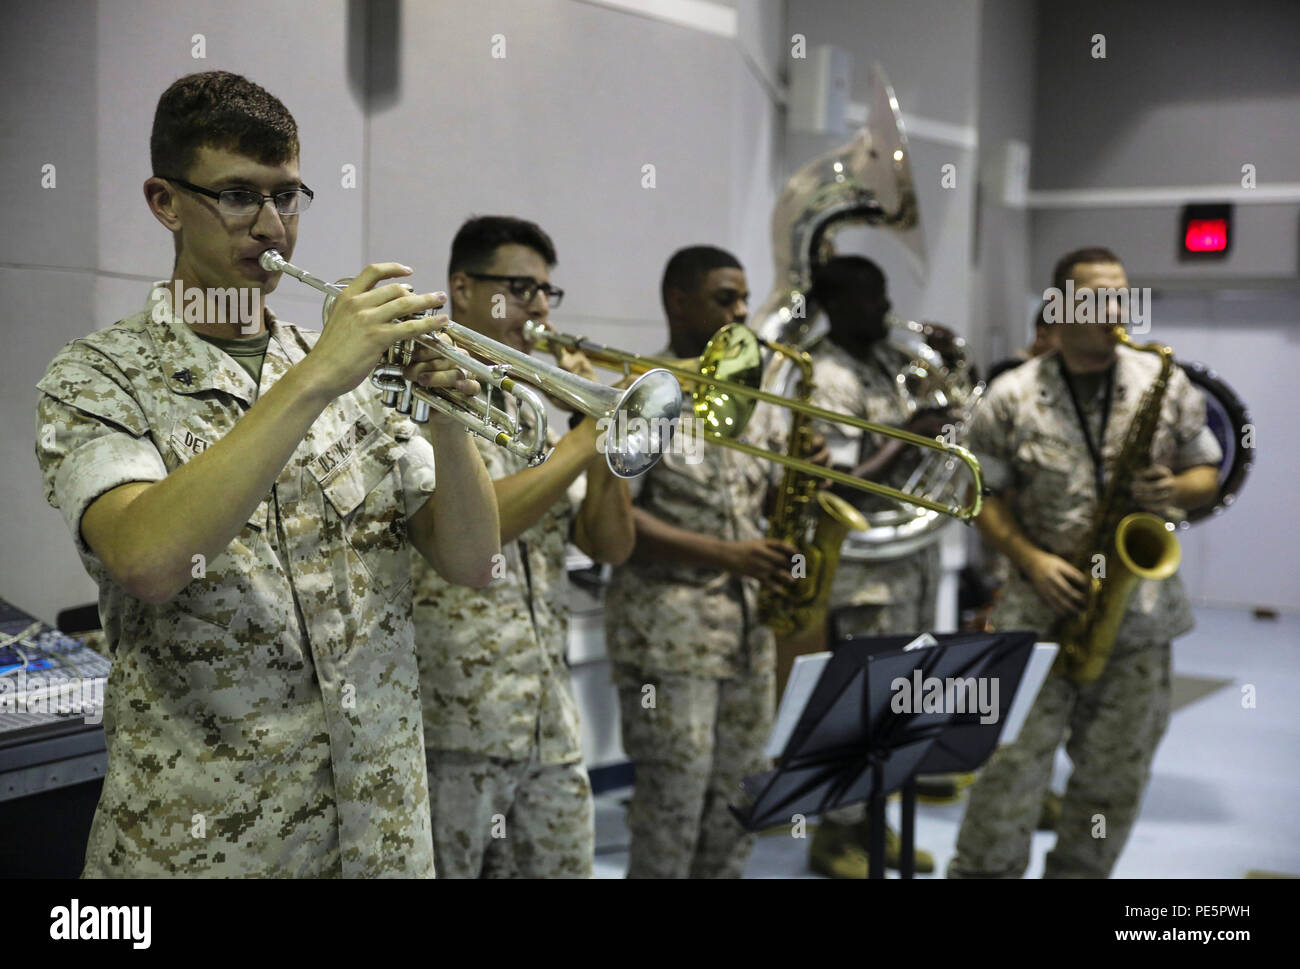 Marines with the 2nd Marine Division Band rehearse for Amber N. Carter, a resident of Hubert, N.C., during her visit to the band’s command post at Camp Lejeune, N.C., Sept. 29, 2015. Amber always dreamed of joining the Marine Corps, but could not due to William’s syndrome. Staff Sgt. Isaiah Riley, a mess chief with 10th Marine Regiment, brought her and her family aboard the base to watch the band play. (U.S. Marine Corps photo by Cpl. Paul S. Martinez/Released) Stock Photo